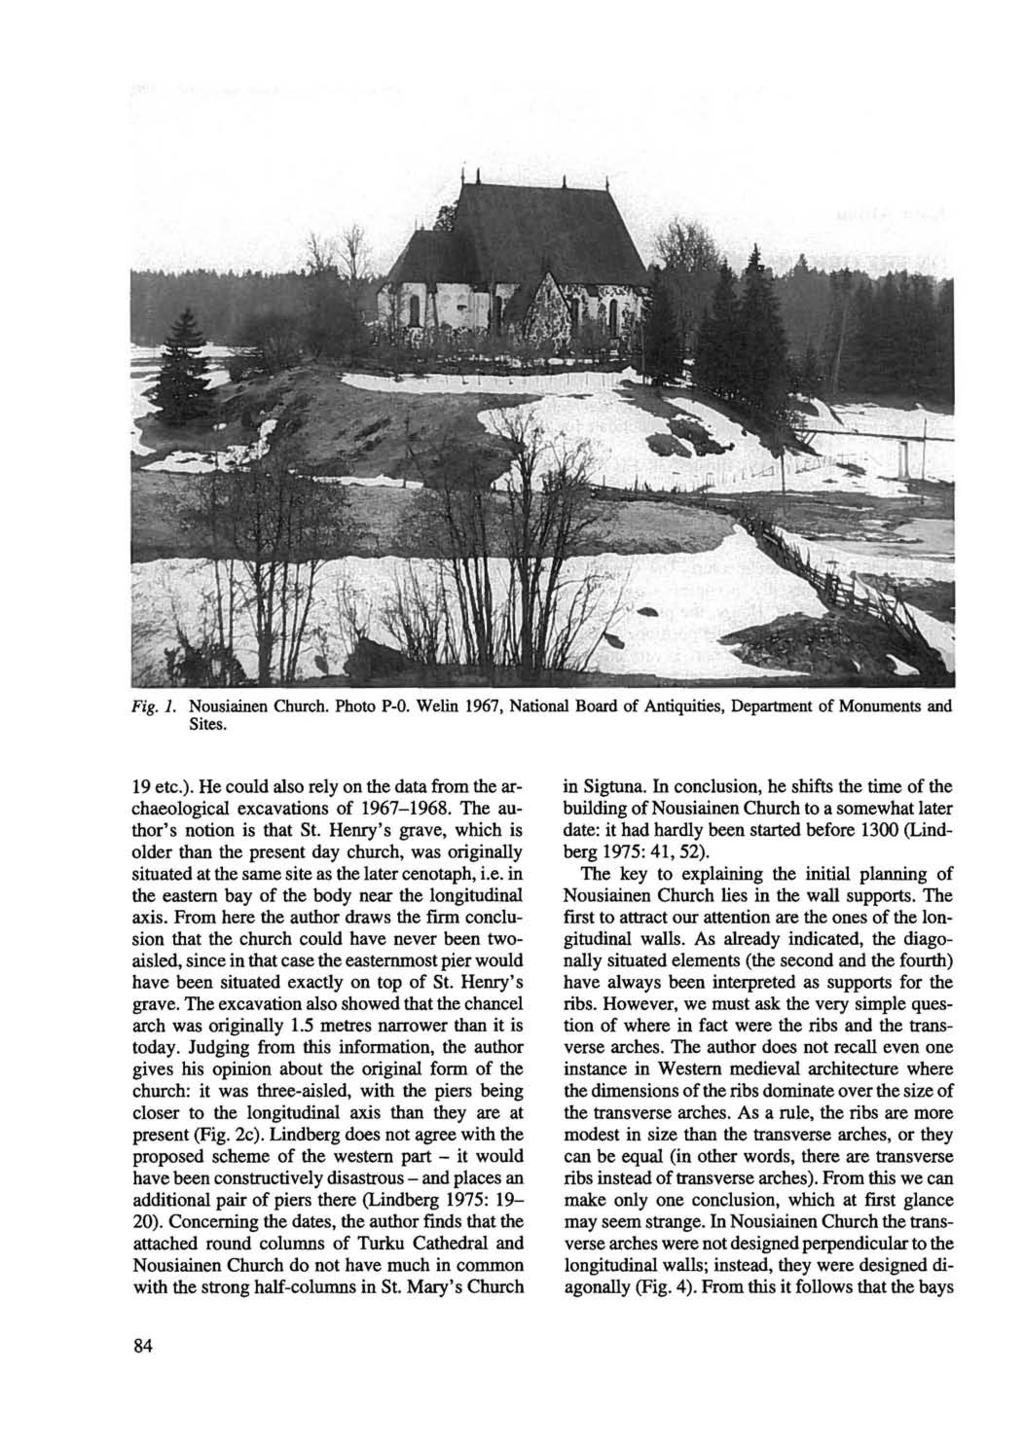 Fig. 1. Nousiainen Church. Photo P-O. Welin 1967, National Board of Antiquities, Department of Monuments and Sites. 19 etc.).